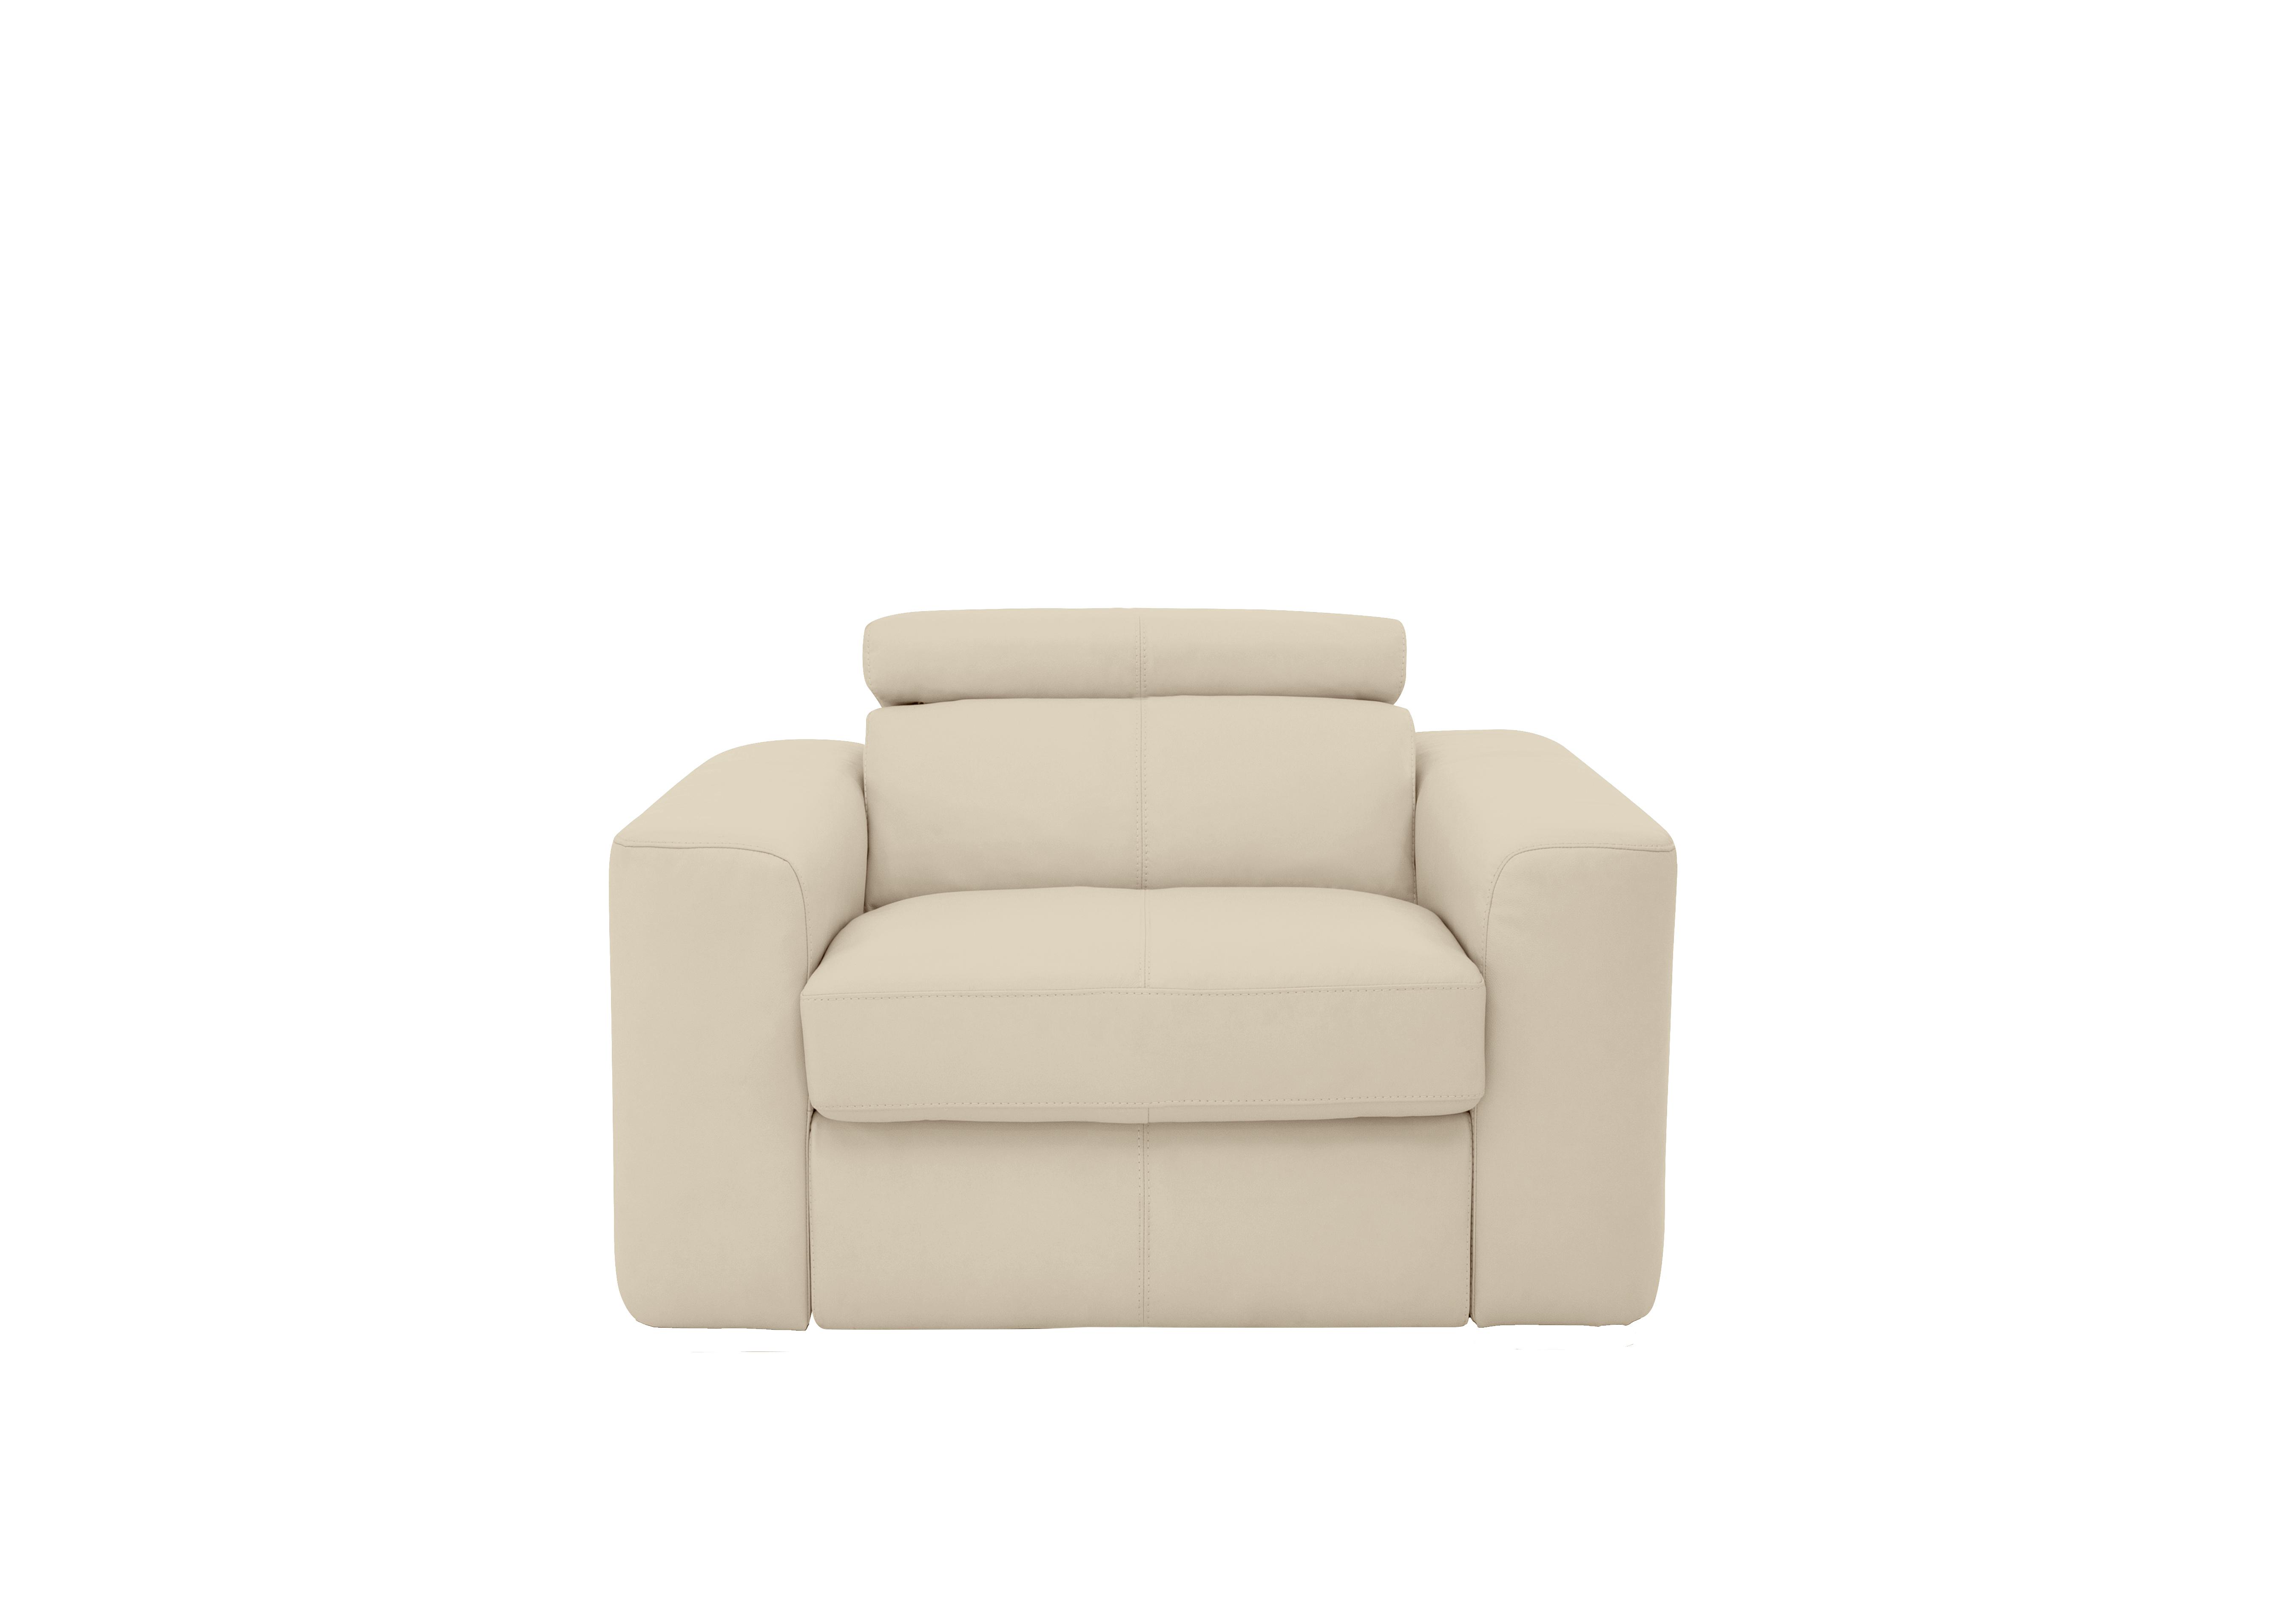 Infinity Leather Armchair in Bv-862c Bisque on Furniture Village